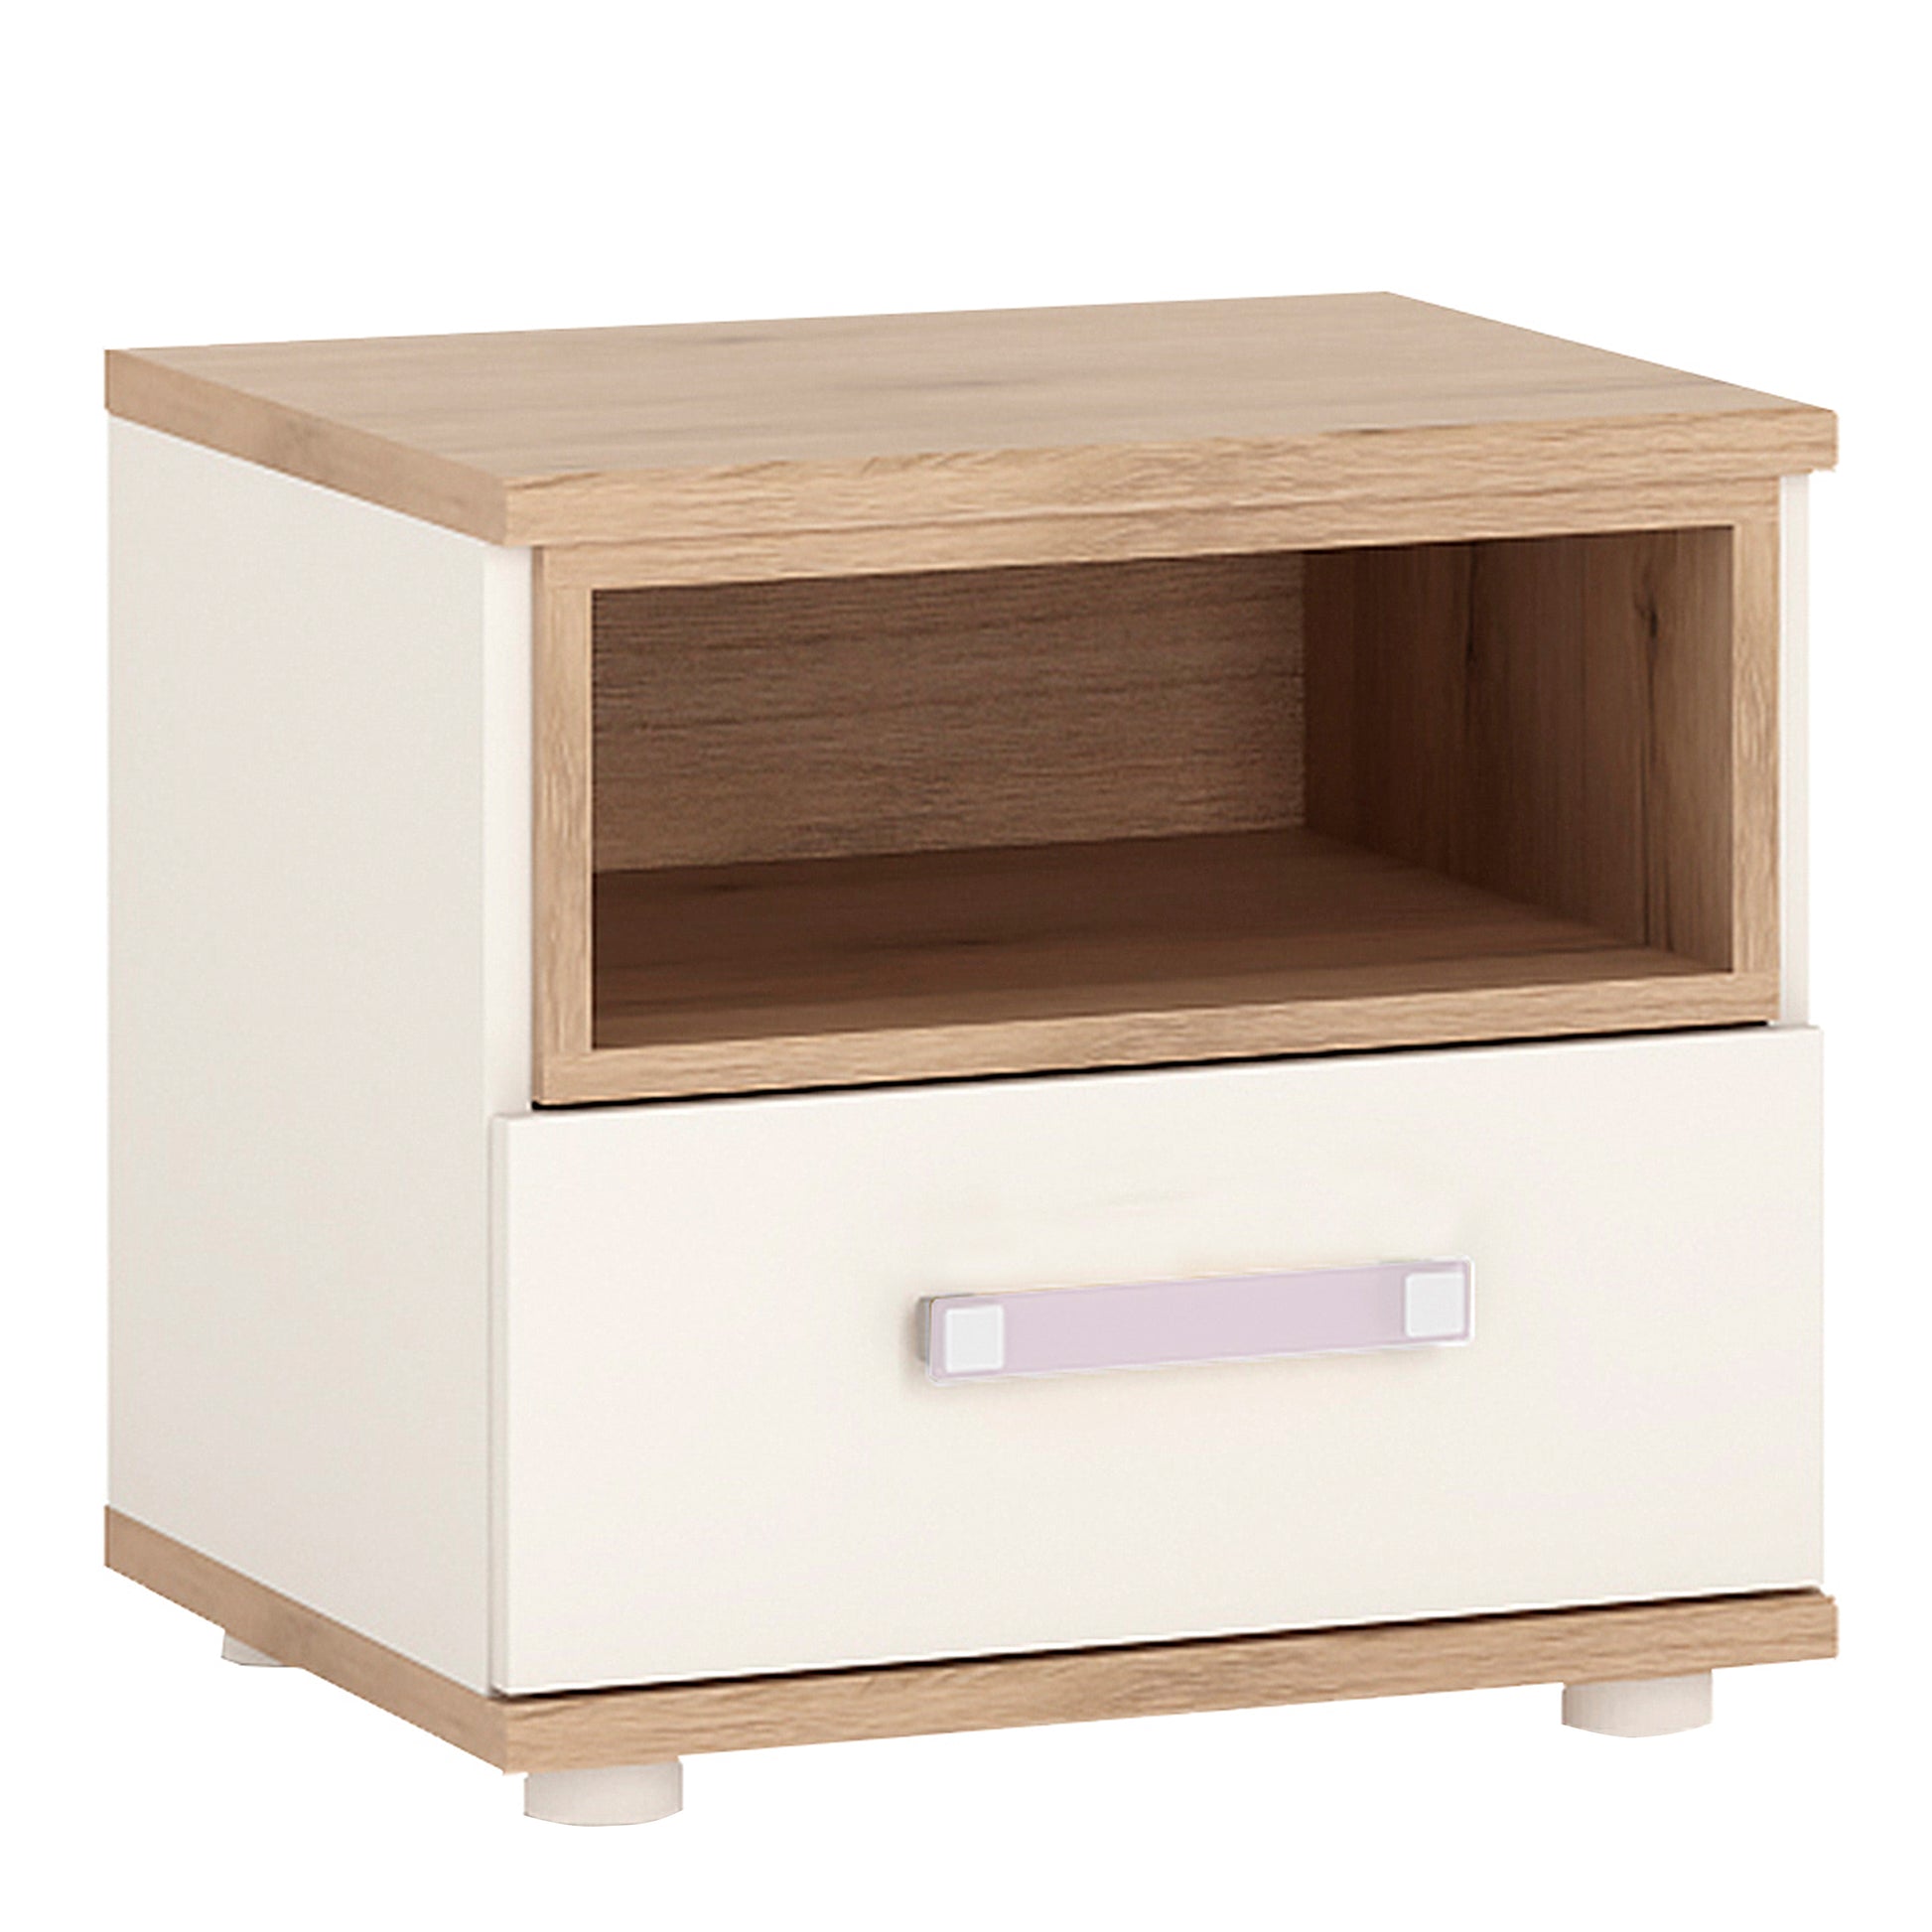 4Kids  1 Drawer bedside Cabinet in Light Oak and white High Gloss (lilac handles)